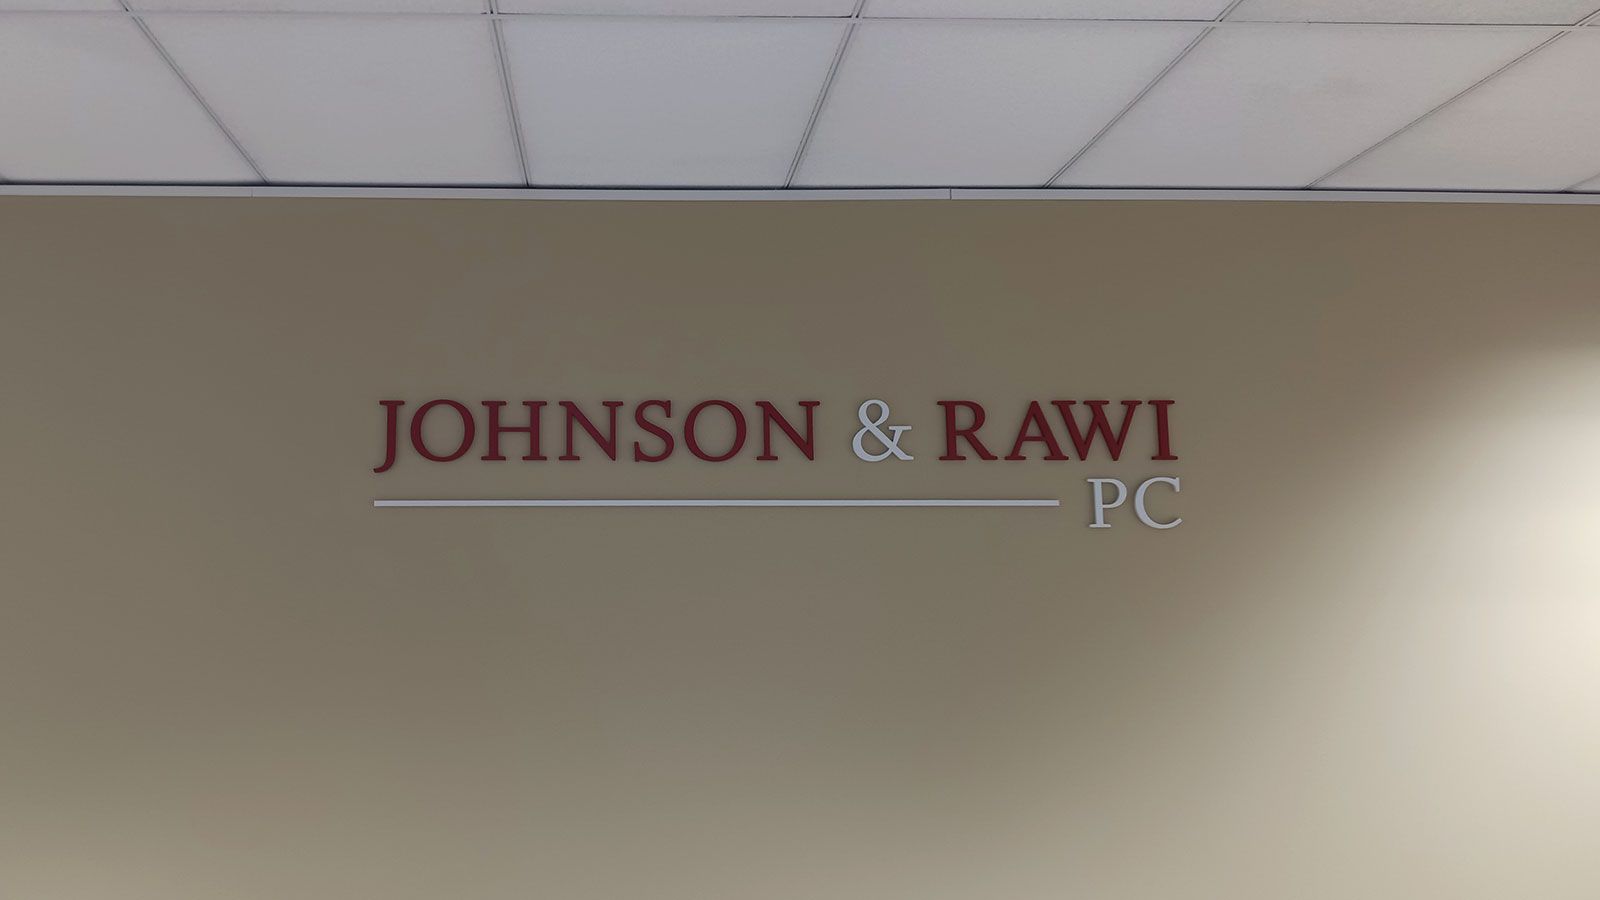 Johnson and Rawi PC 3D letters